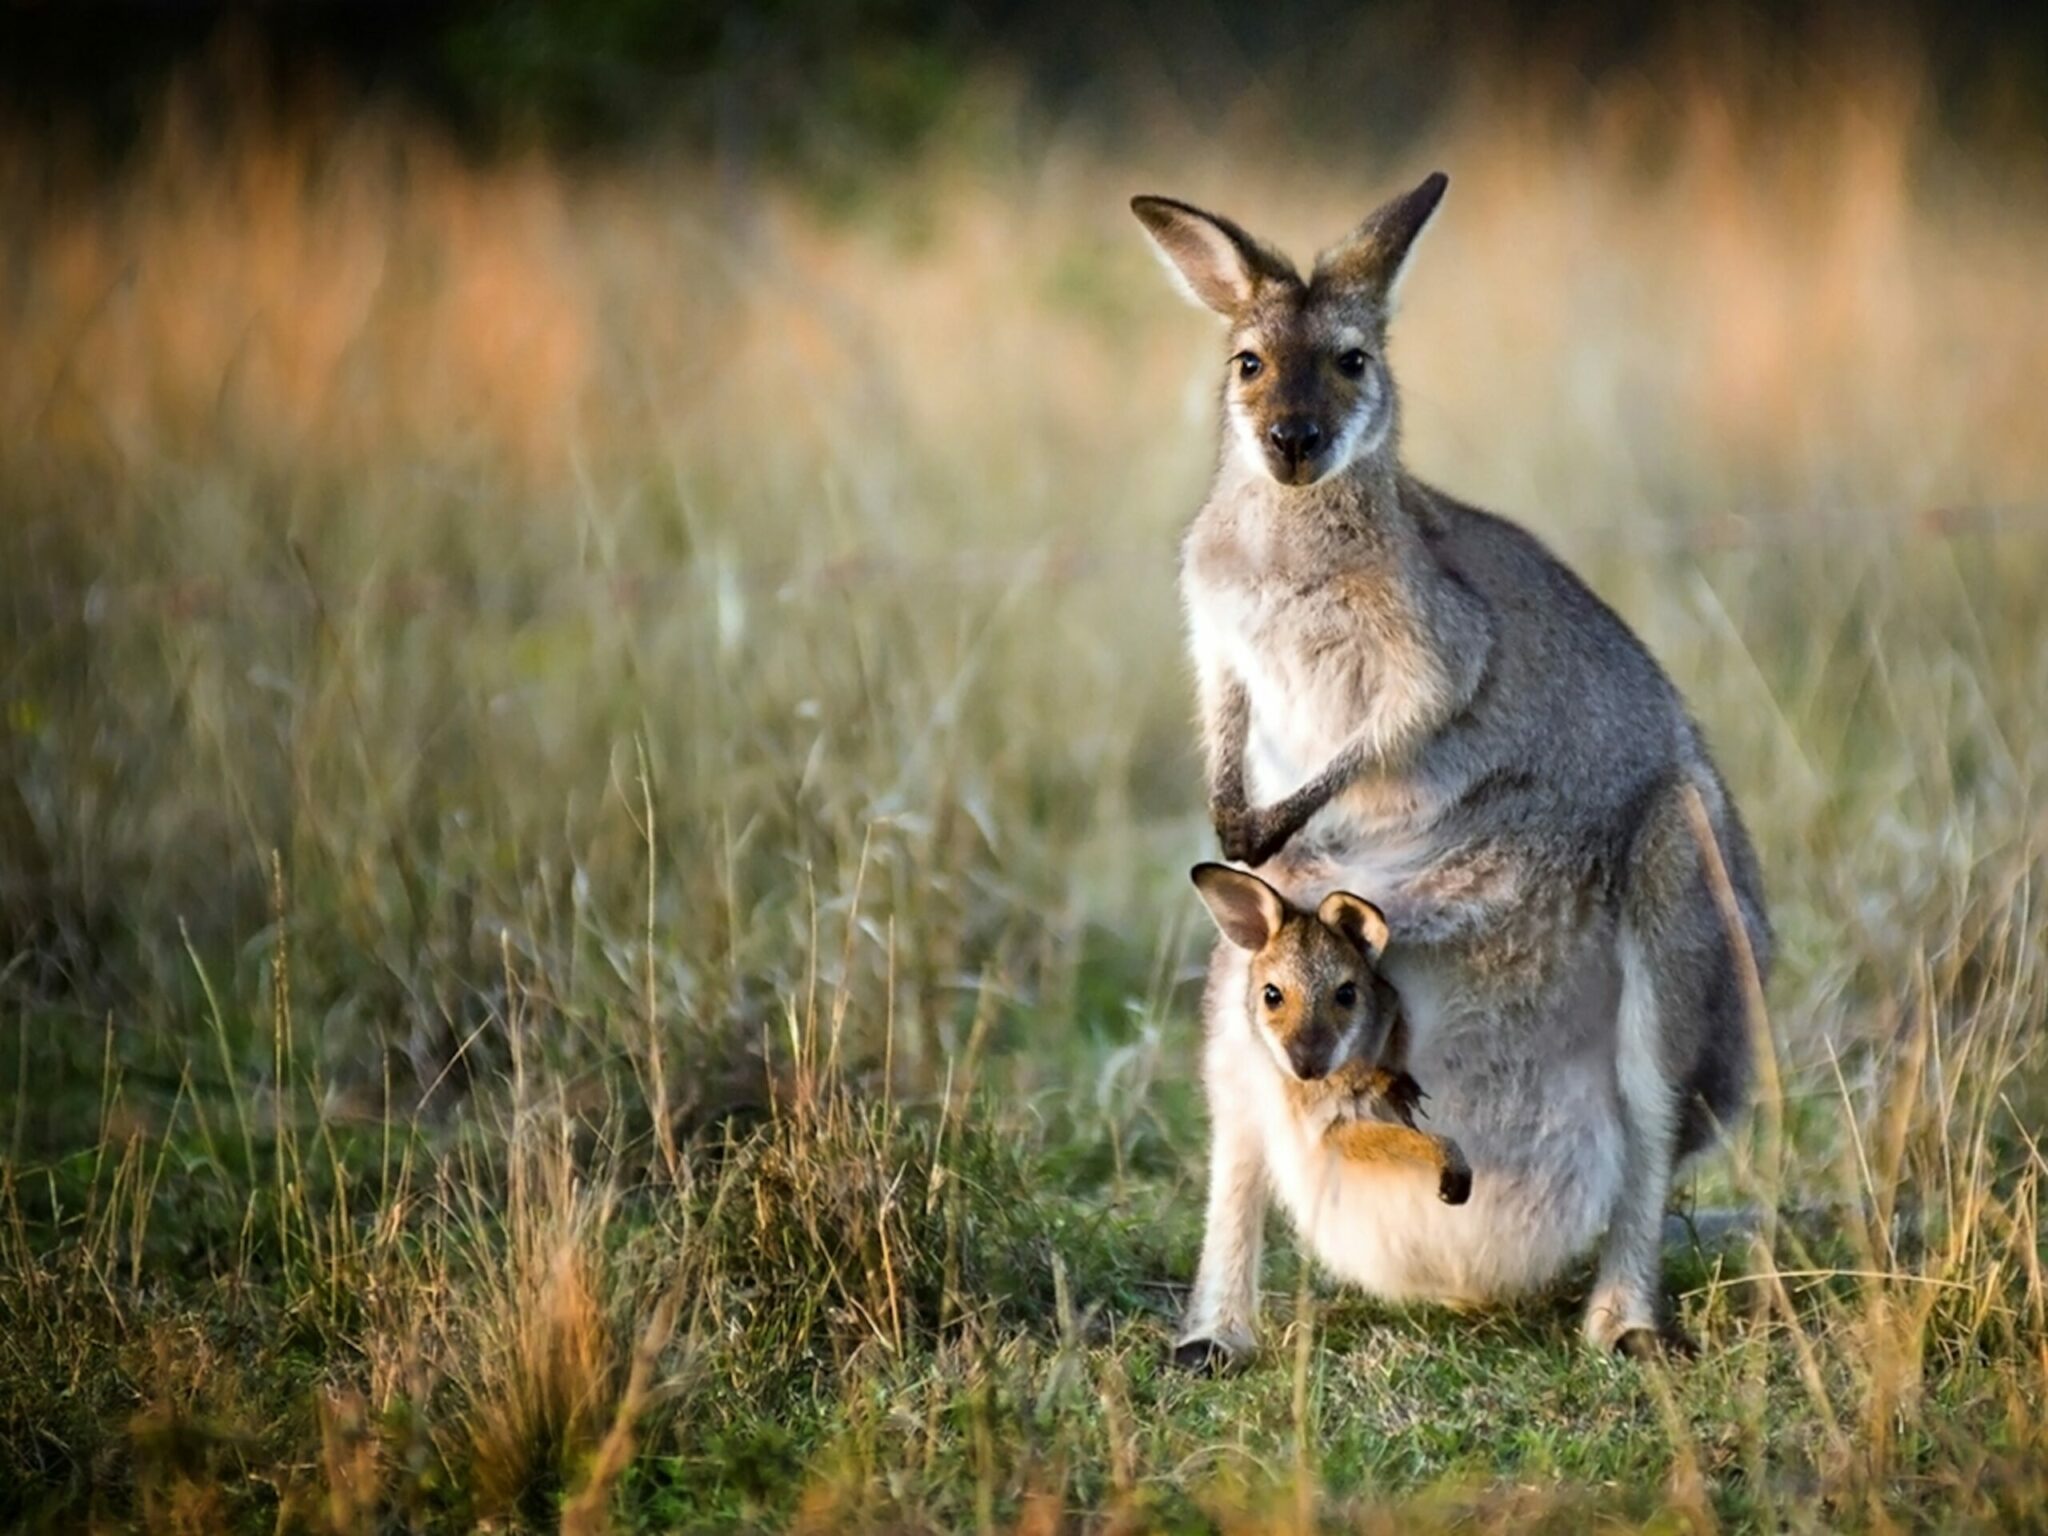 do all kangaroos and marsupials have pouches for babies to live and hide until they are old enough to leave